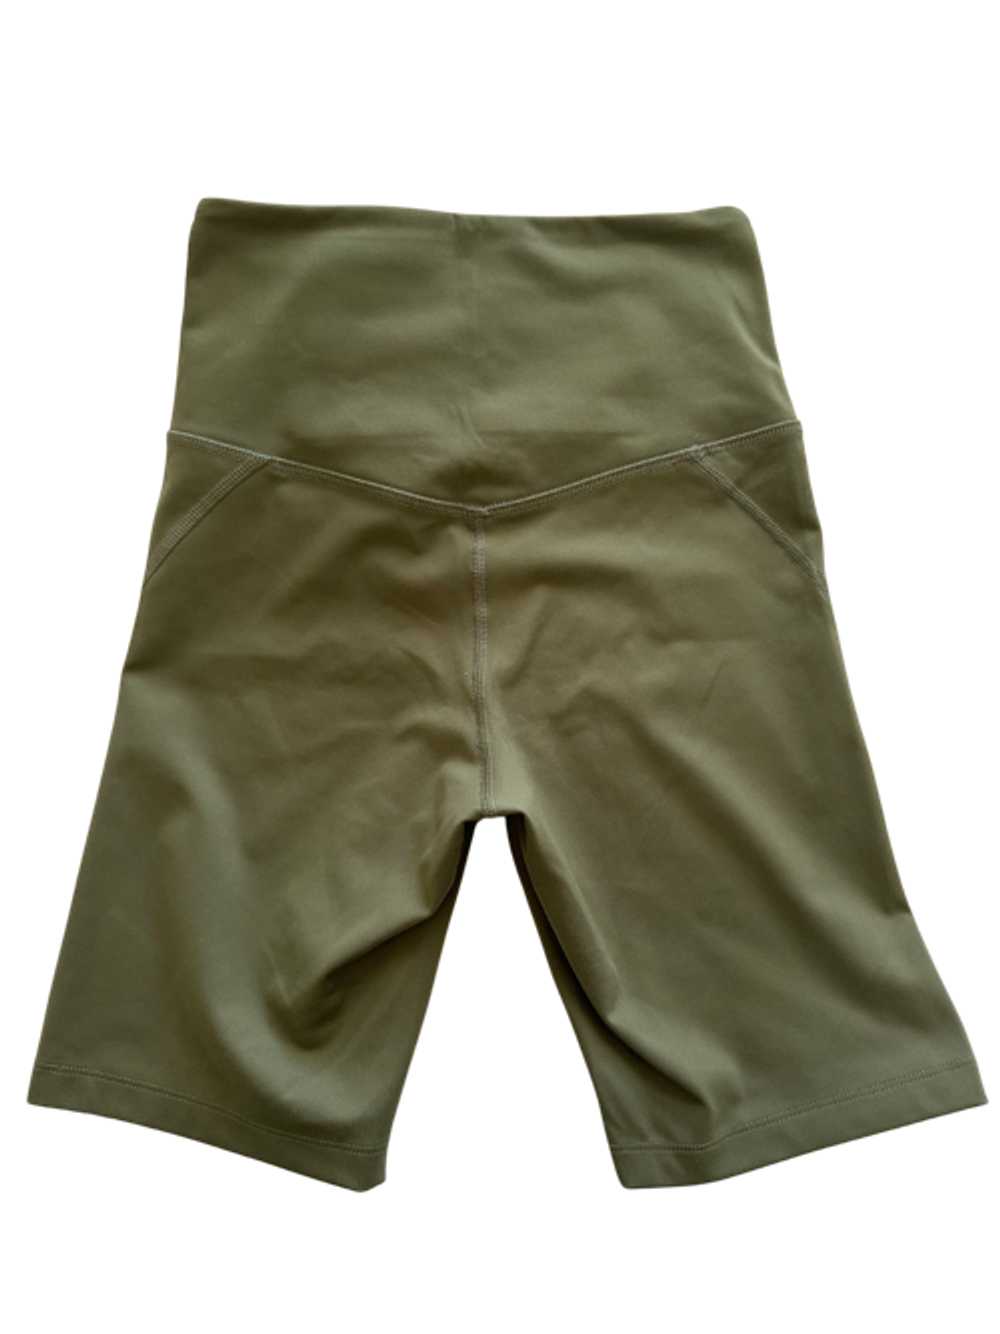 Girlfriend Collective Olive High-Rise Bike Short - image 5